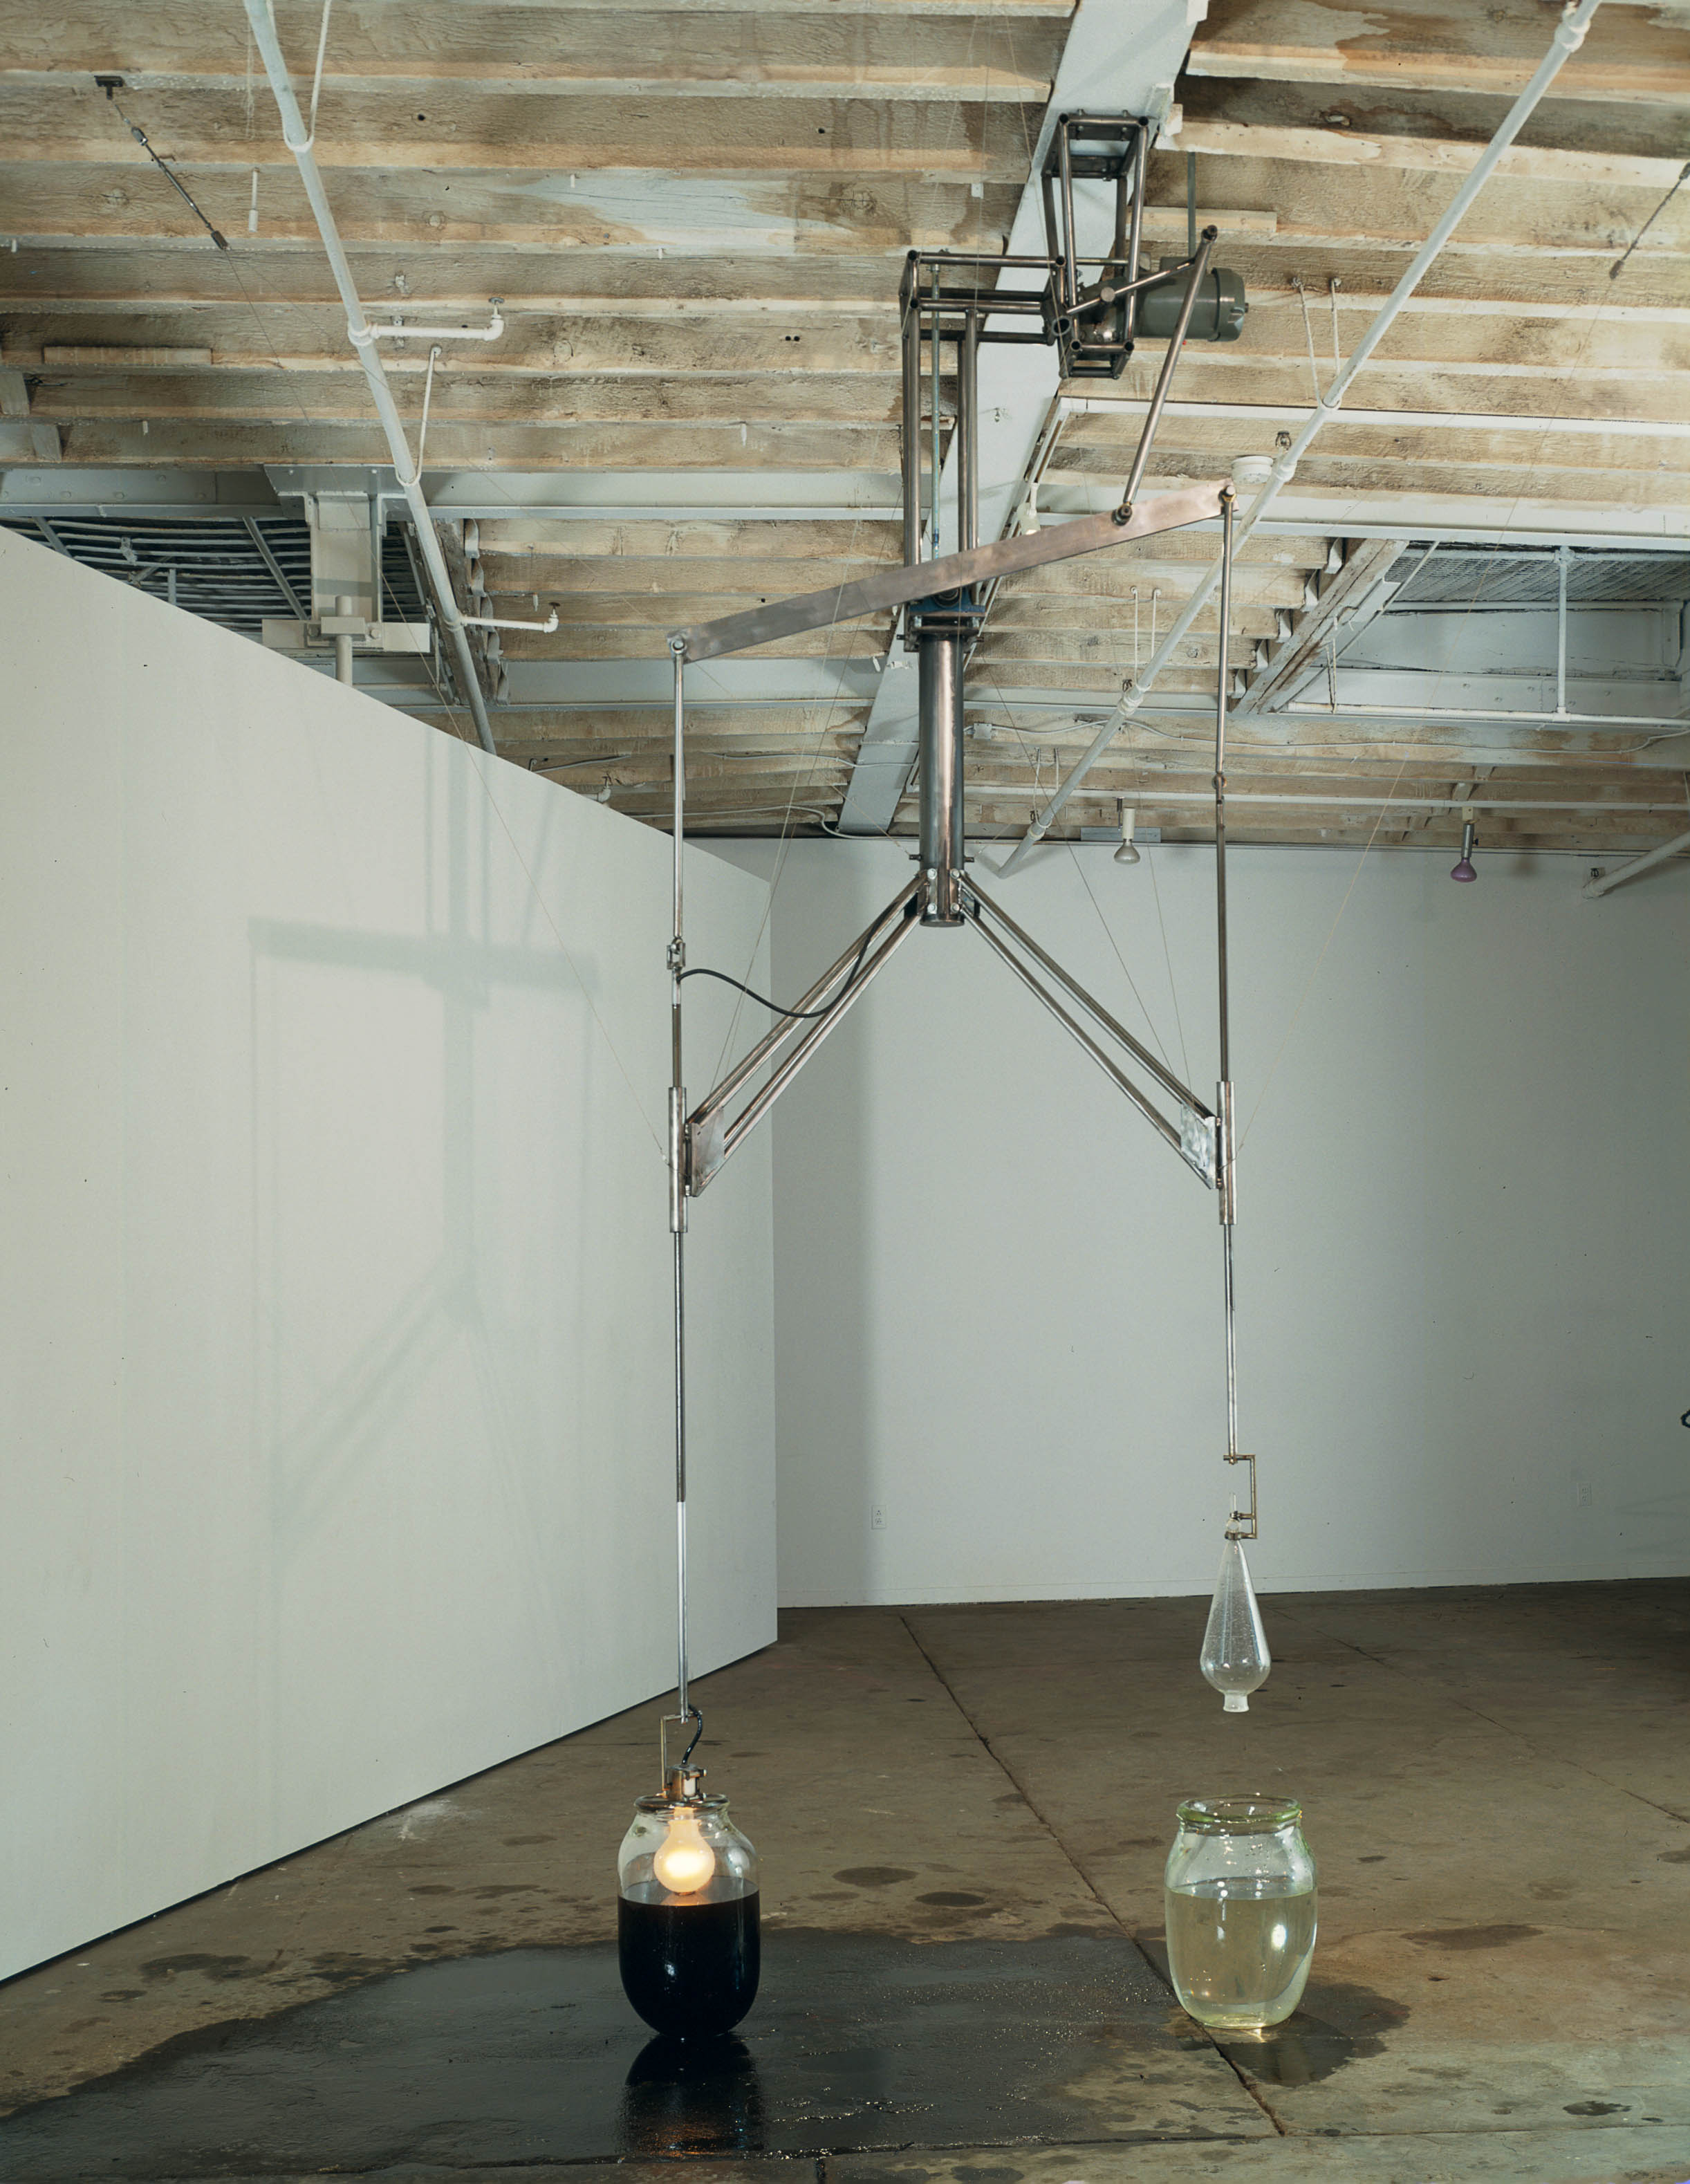  Lusts, 1992, Glass, water, lightbulb, steel, and motor oil, 100 x 20 inches 